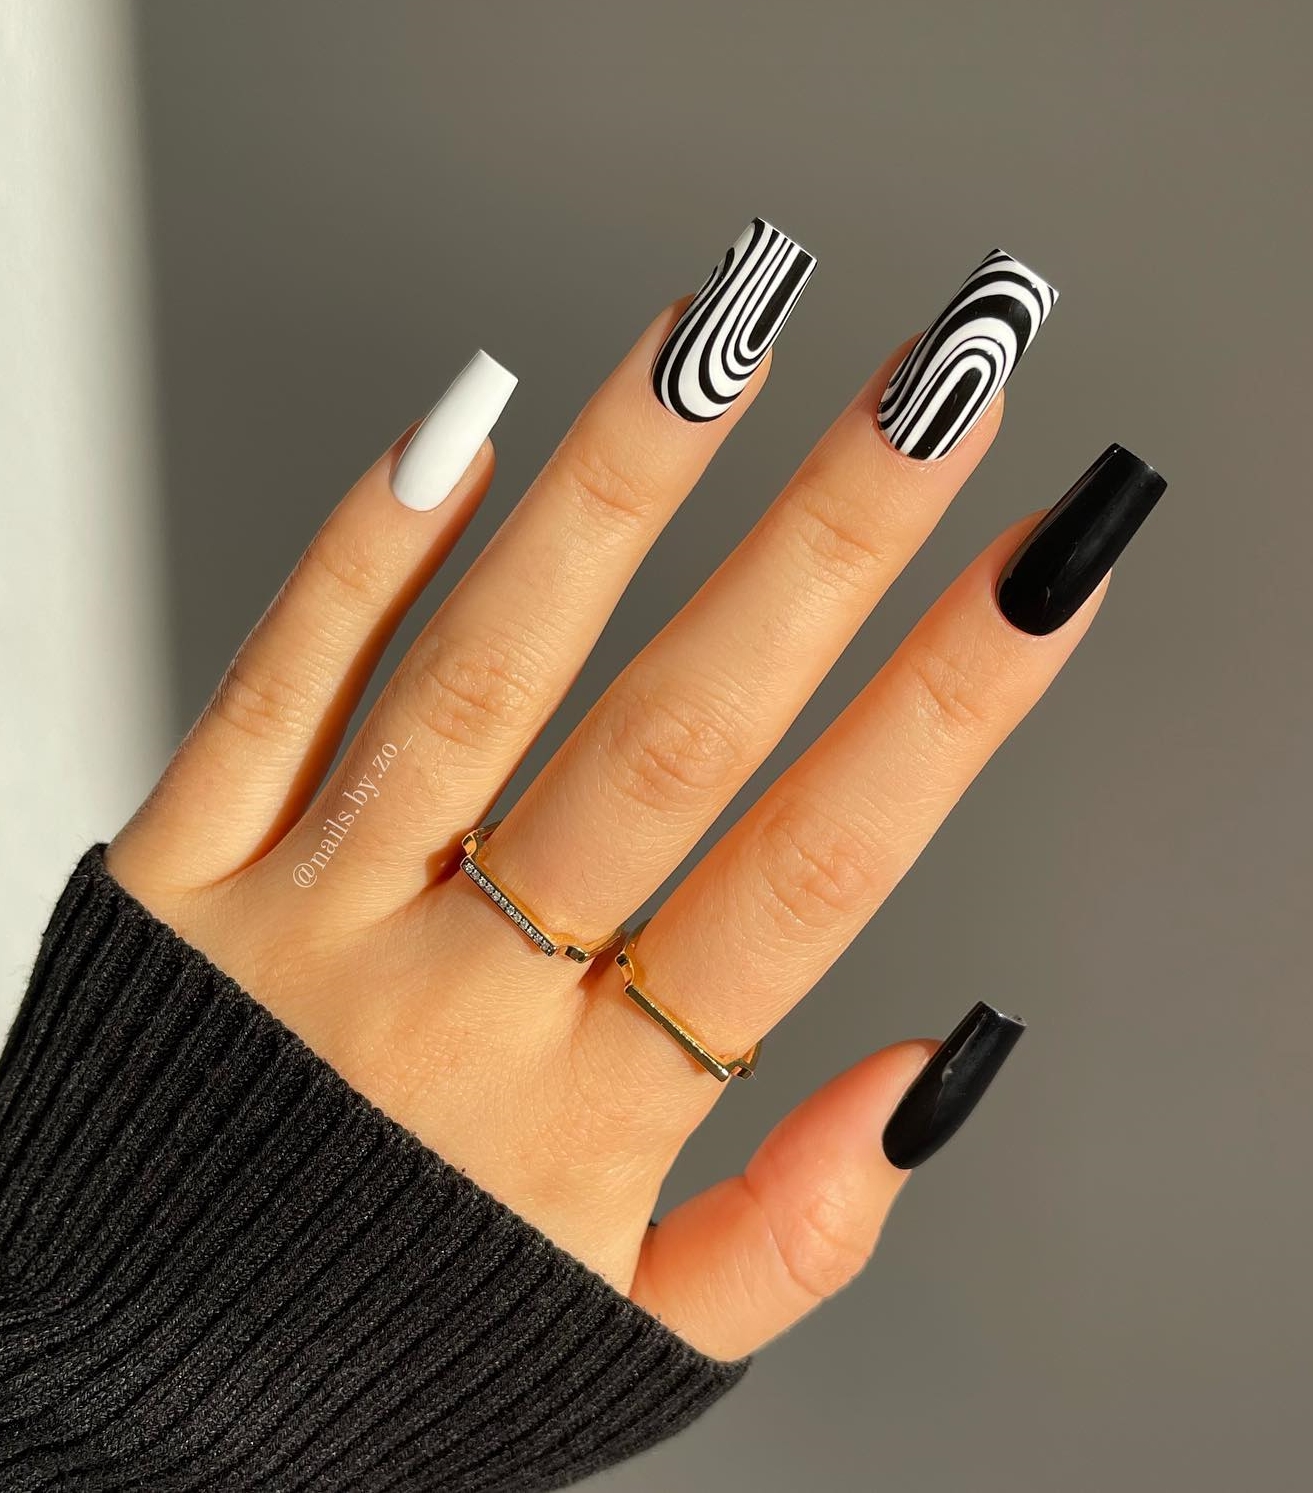 Long Square Nails with Geometric Black and White Design